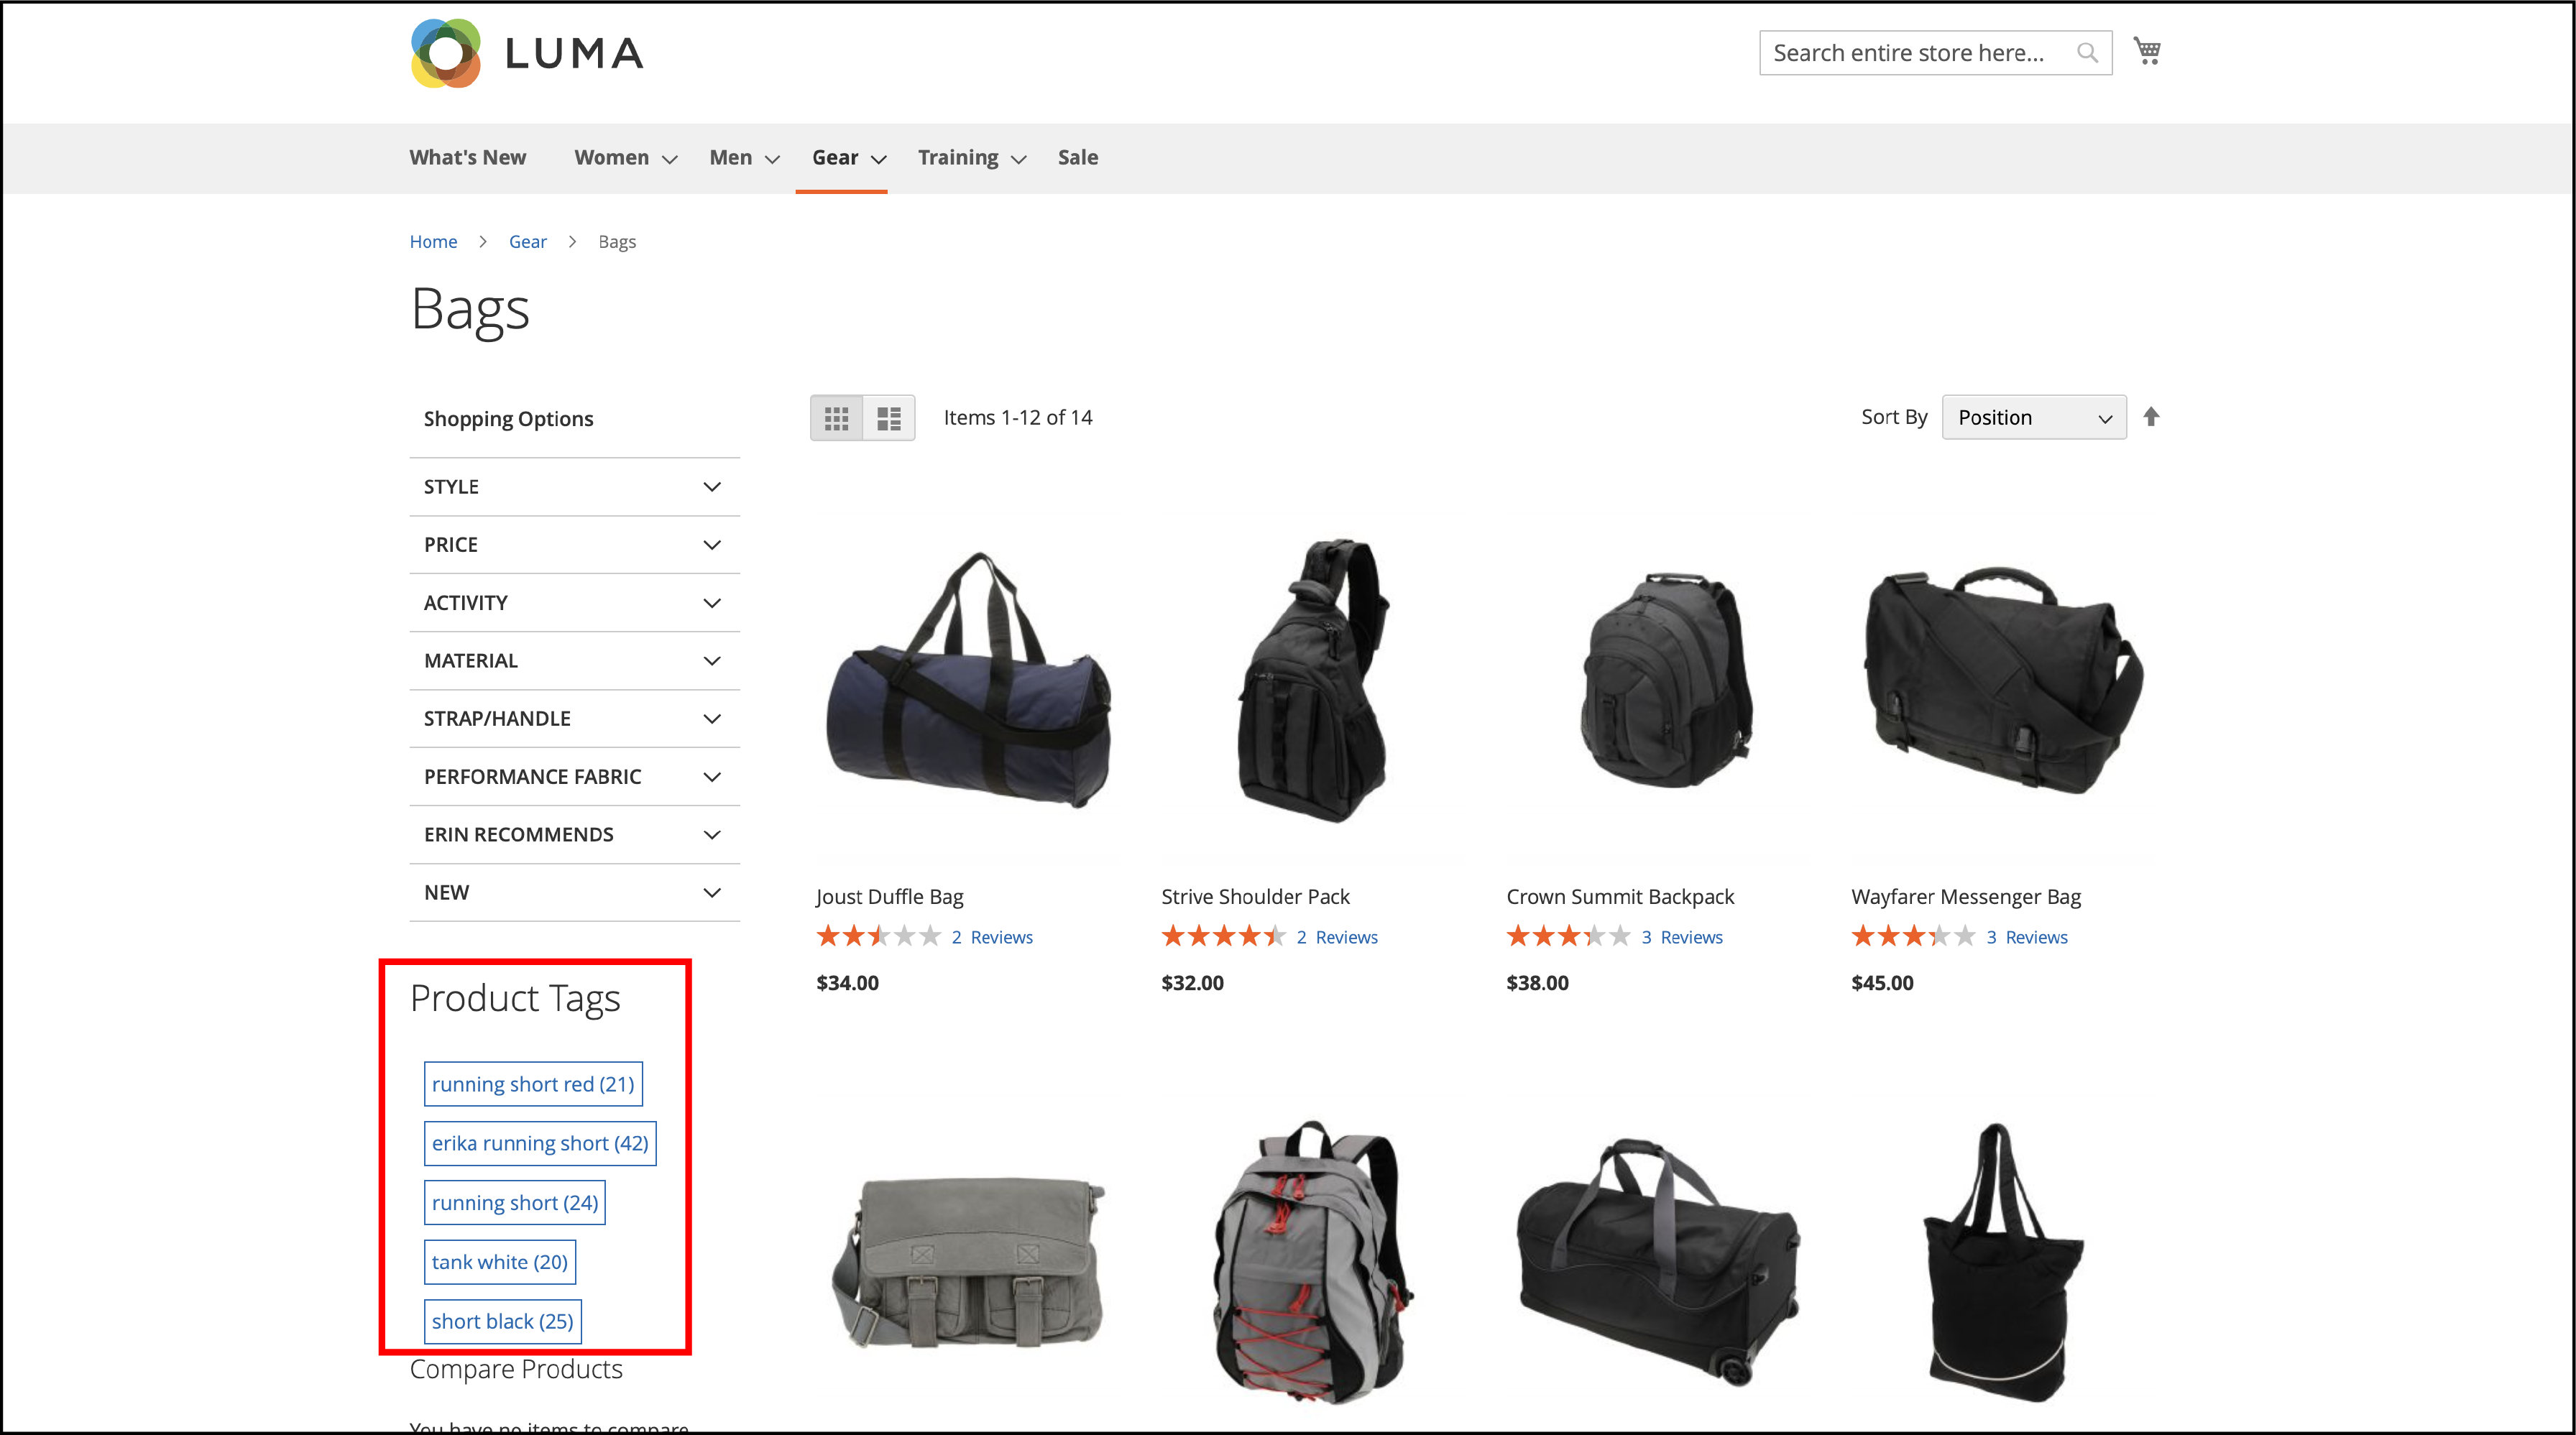 Landofcoder product tag extension- How to Add Product Tags in Magento